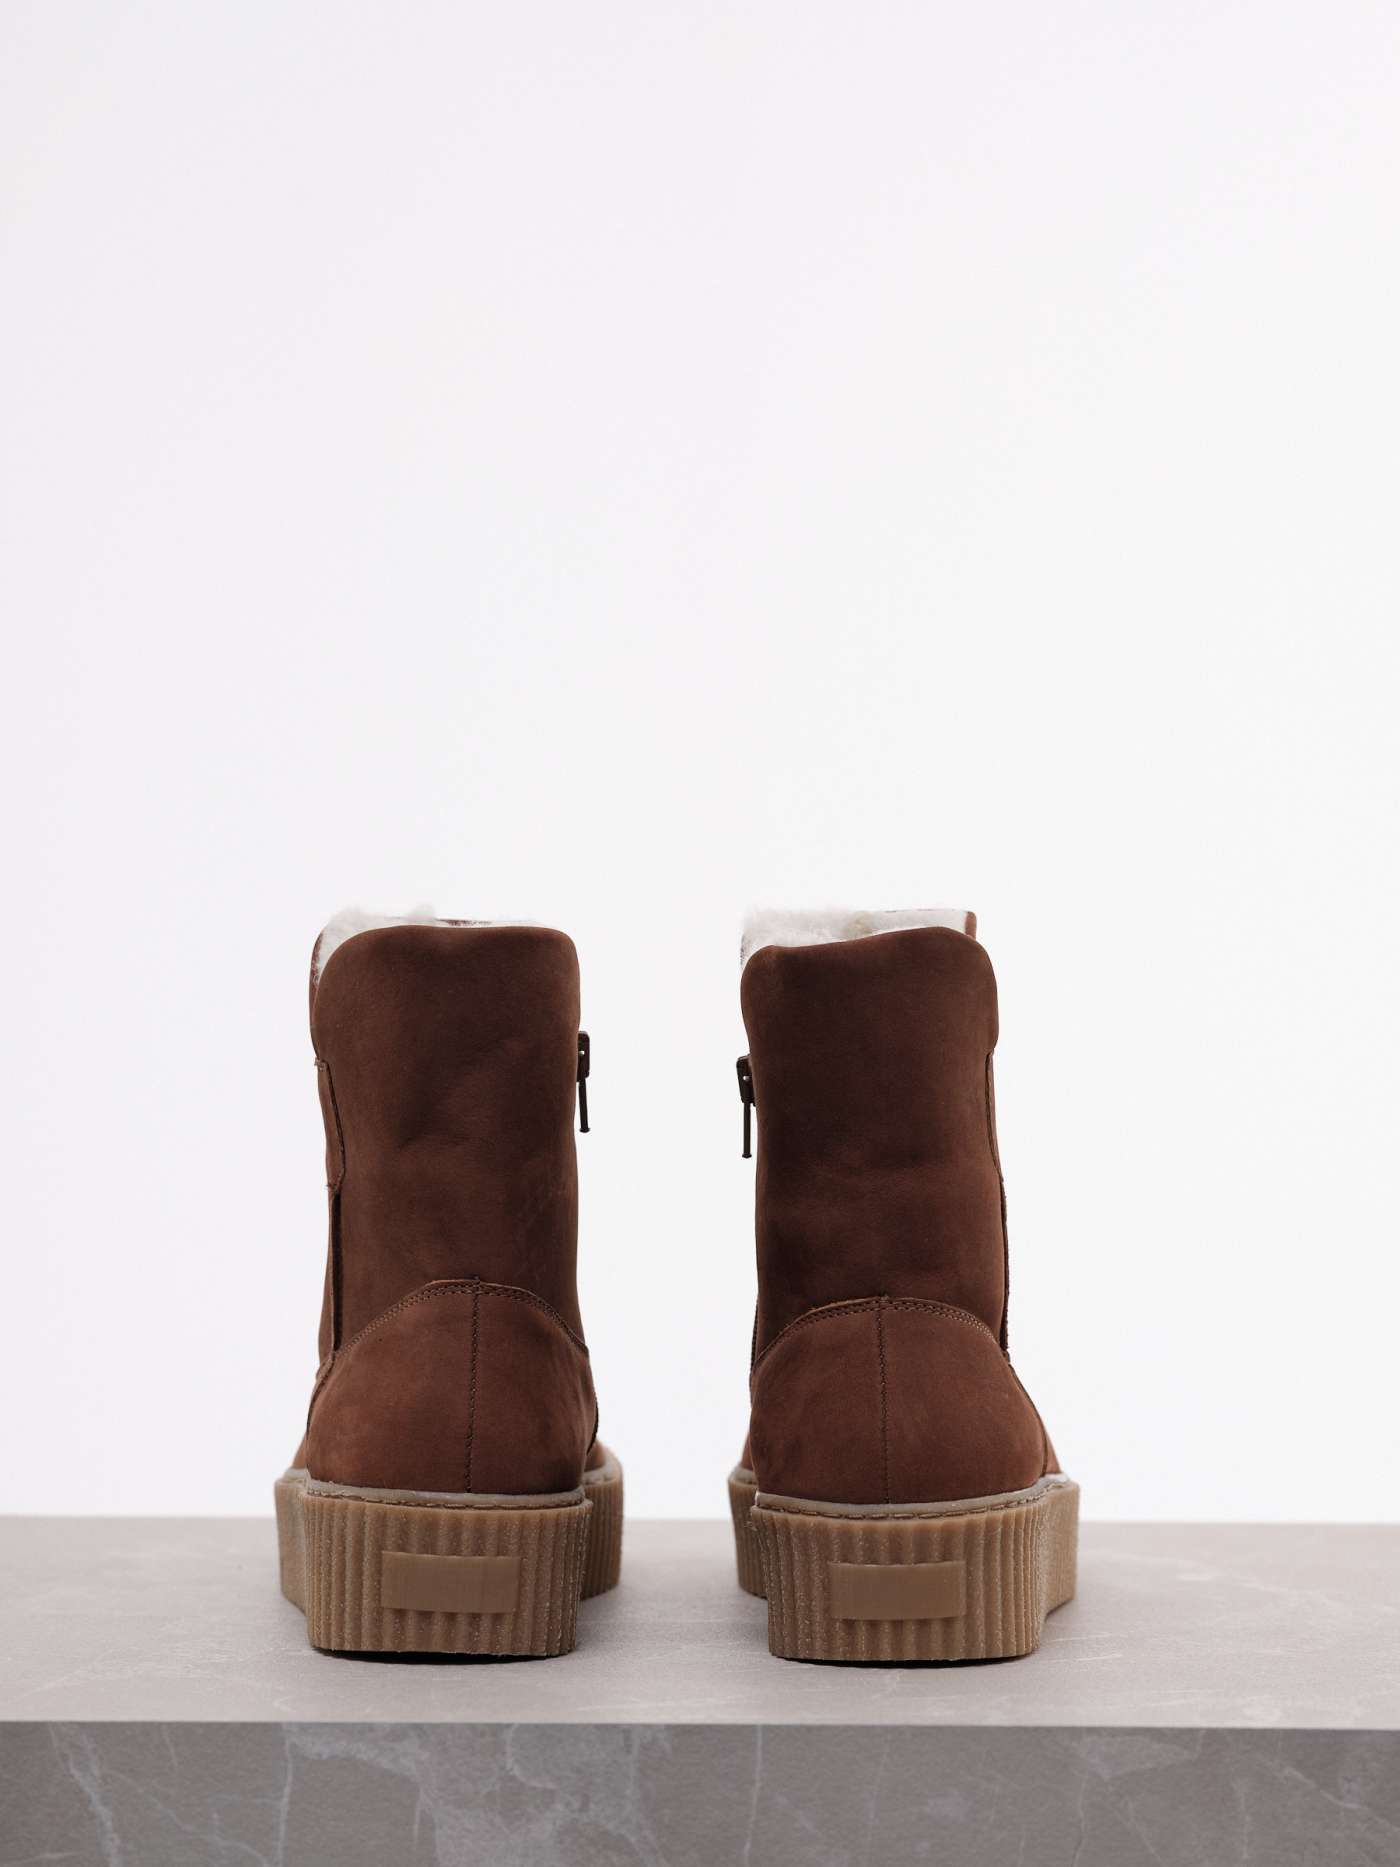 Load image into Gallery viewer, LINED BOOTS - Hazelnut
